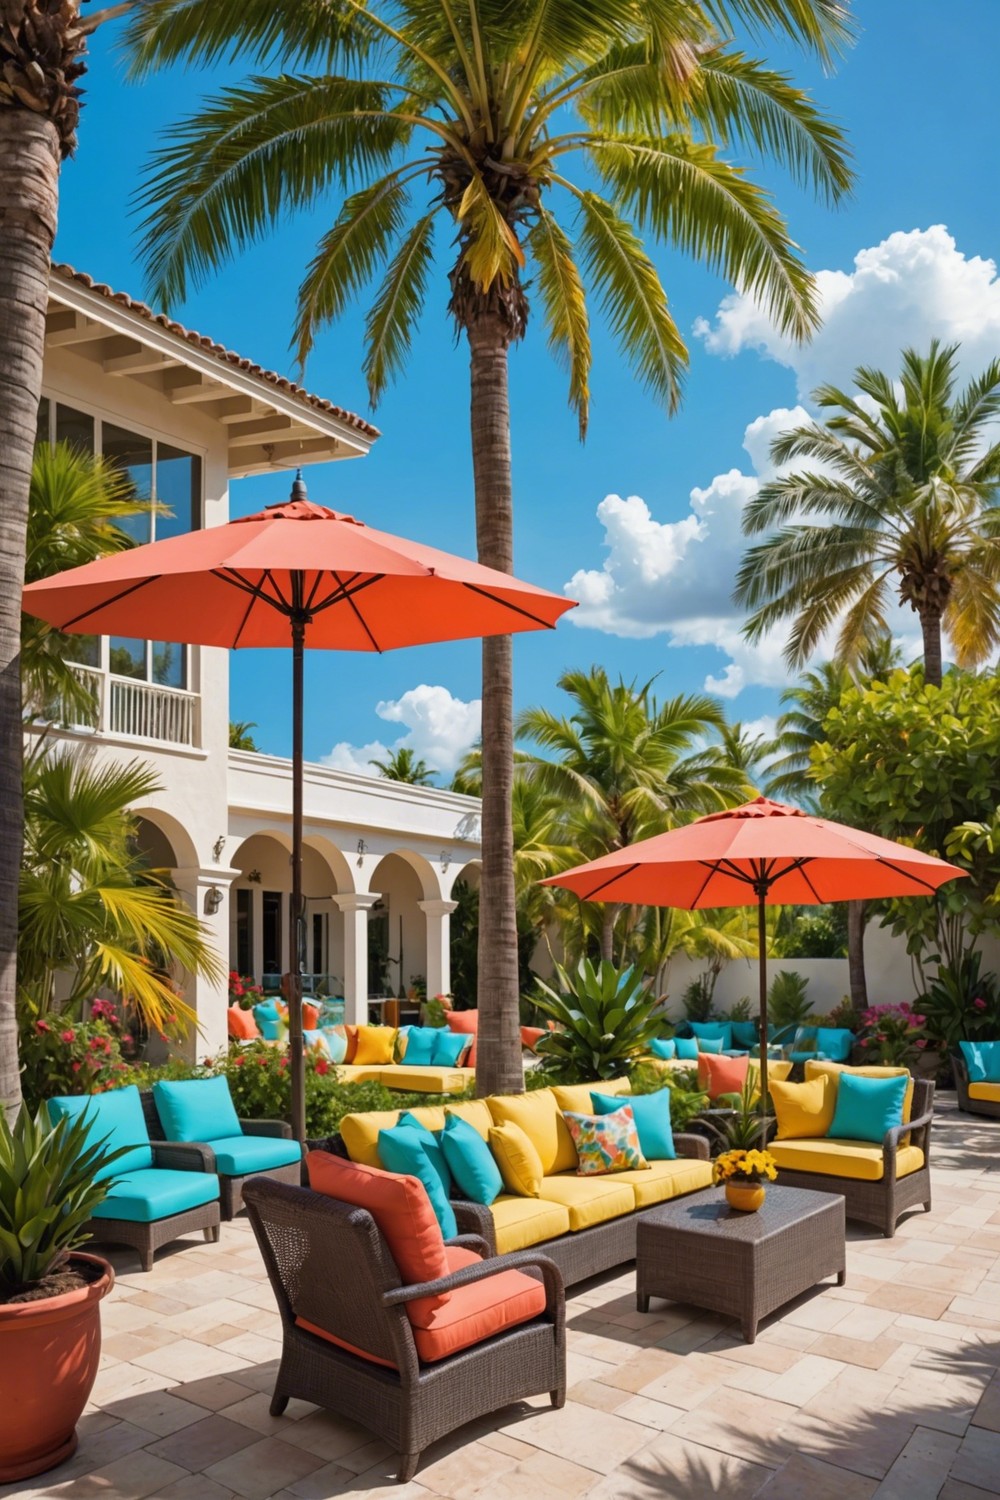 Tropical Patio with Palm Trees and Colorful Accents